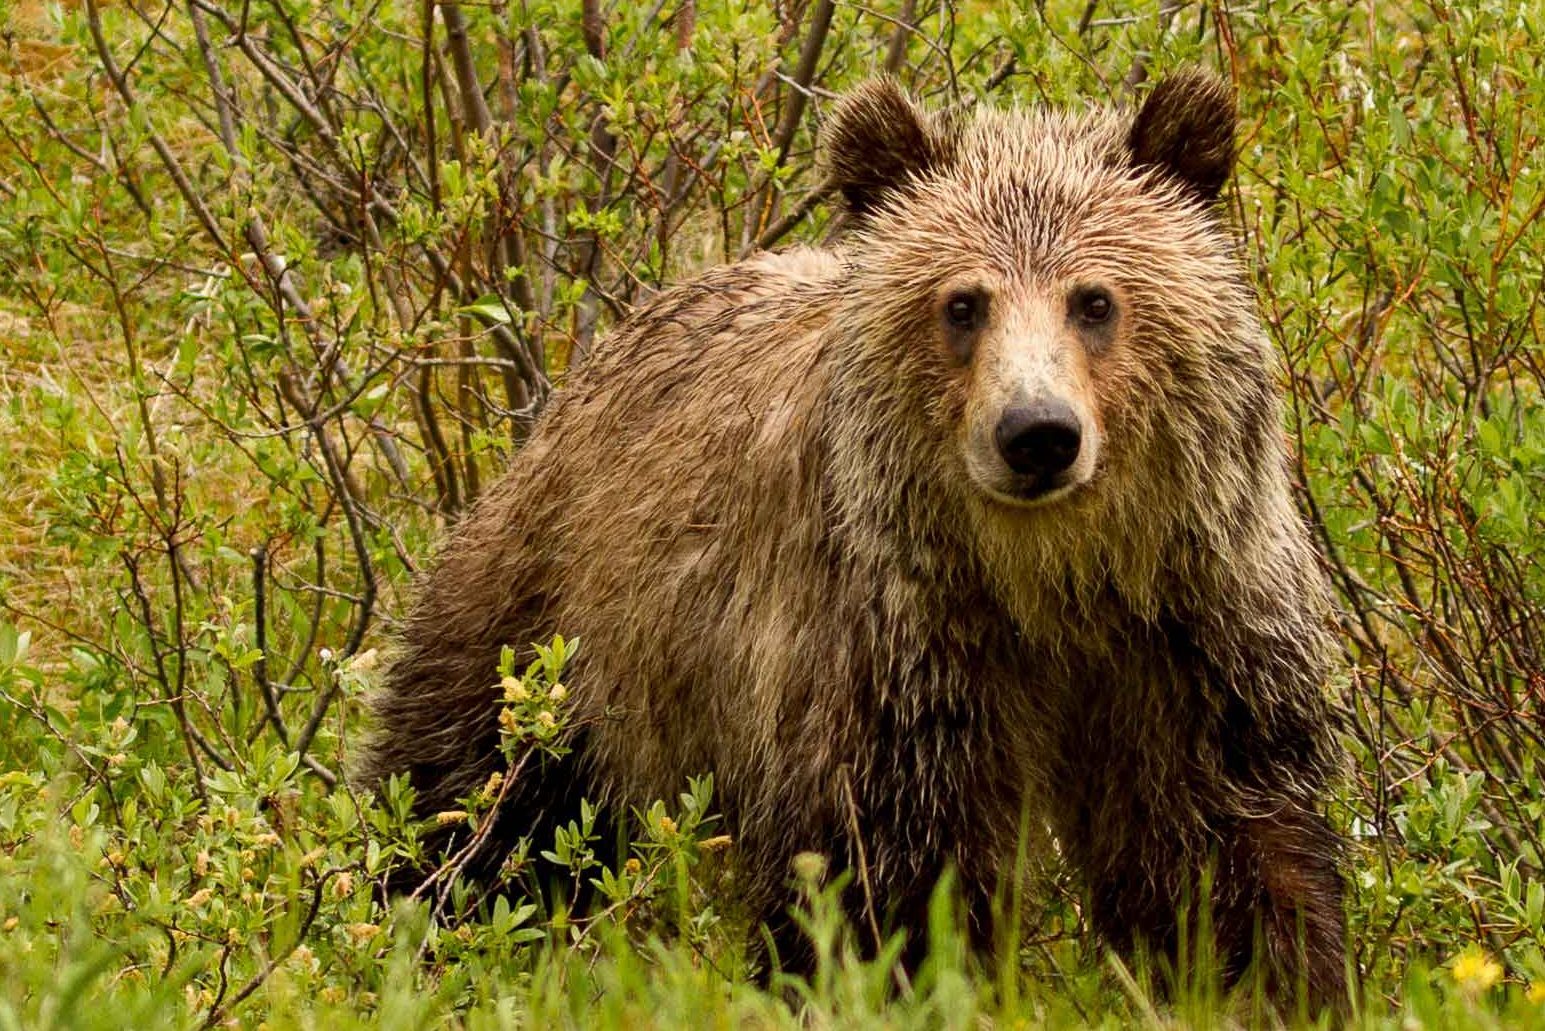 Grizzly bears live in Manitoba, including in the Seal River Watershed. Photo by Howard Trofanenko.